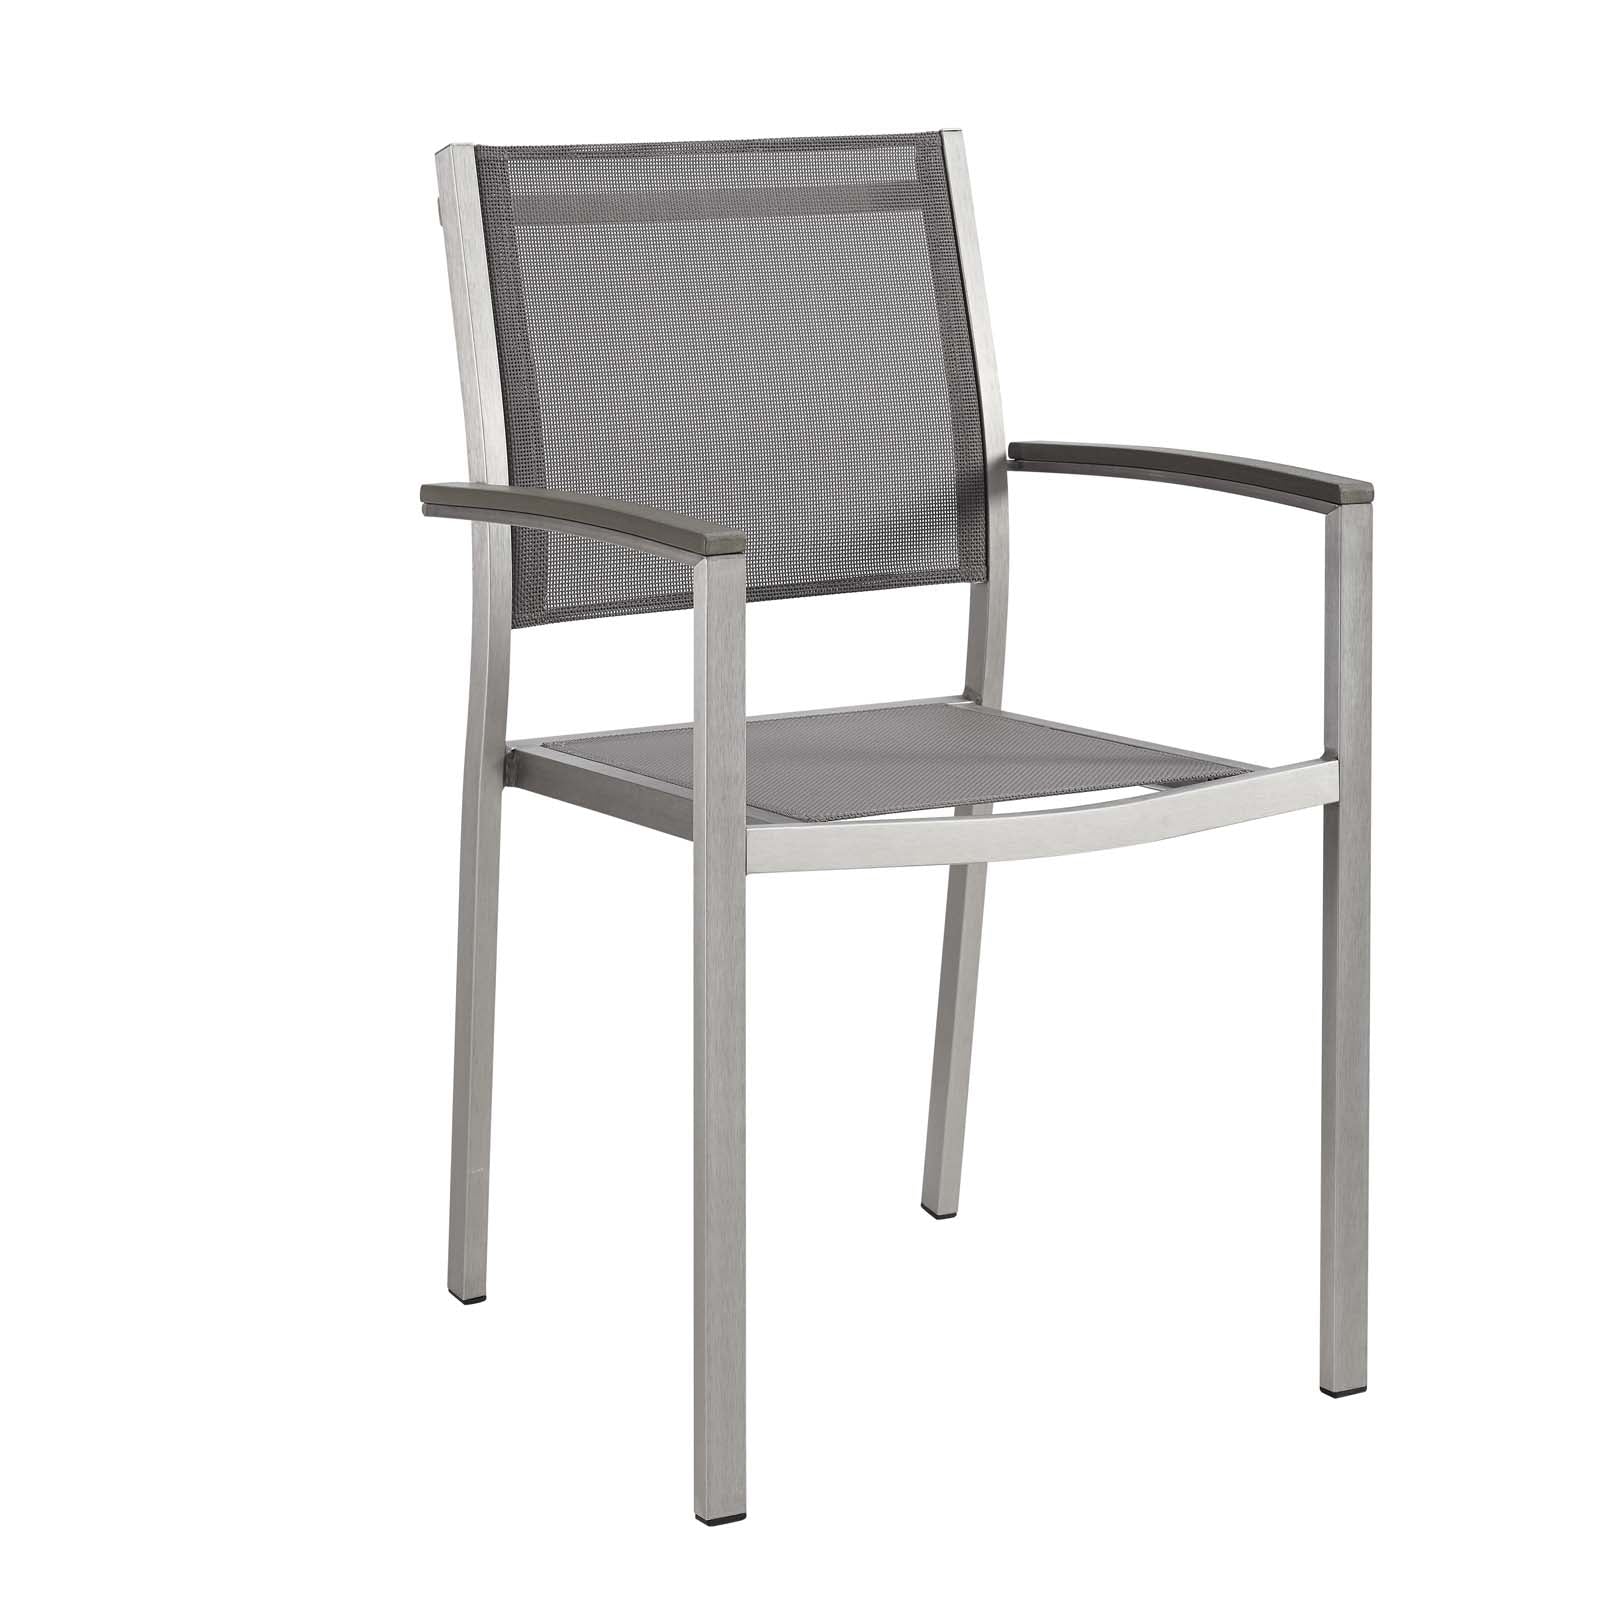 Modway Outdoor Dining Chairs - Shore Dining Chair Outdoor Patio Aluminum Set of 2 Silver Gray